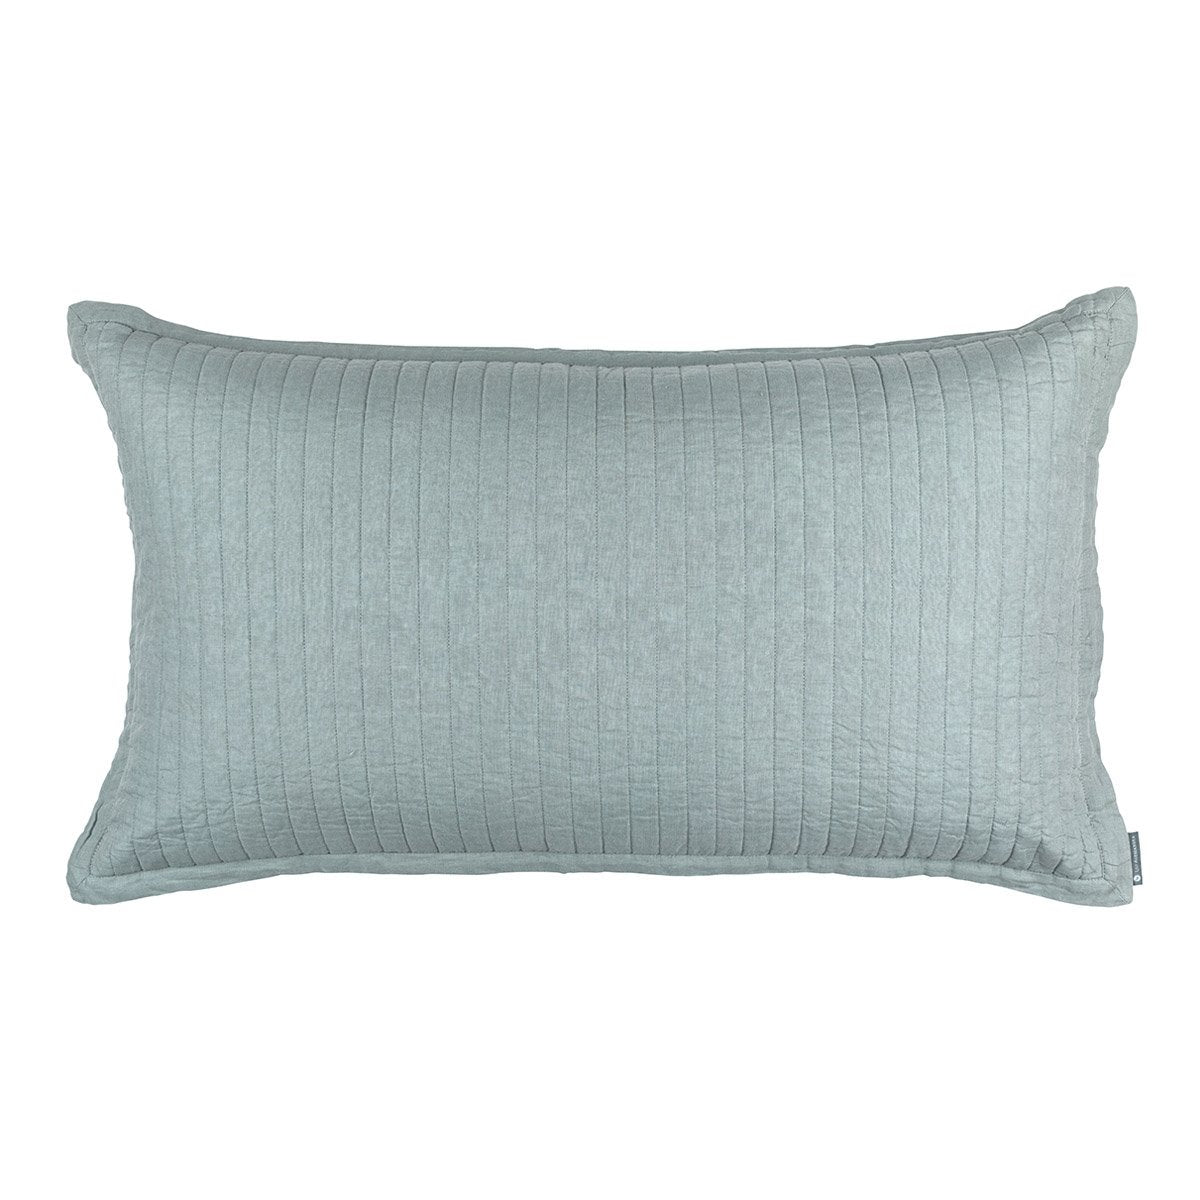 Fig Linens - Lili Alessandra Bedding - Tessa Sky Quilted King Pillow